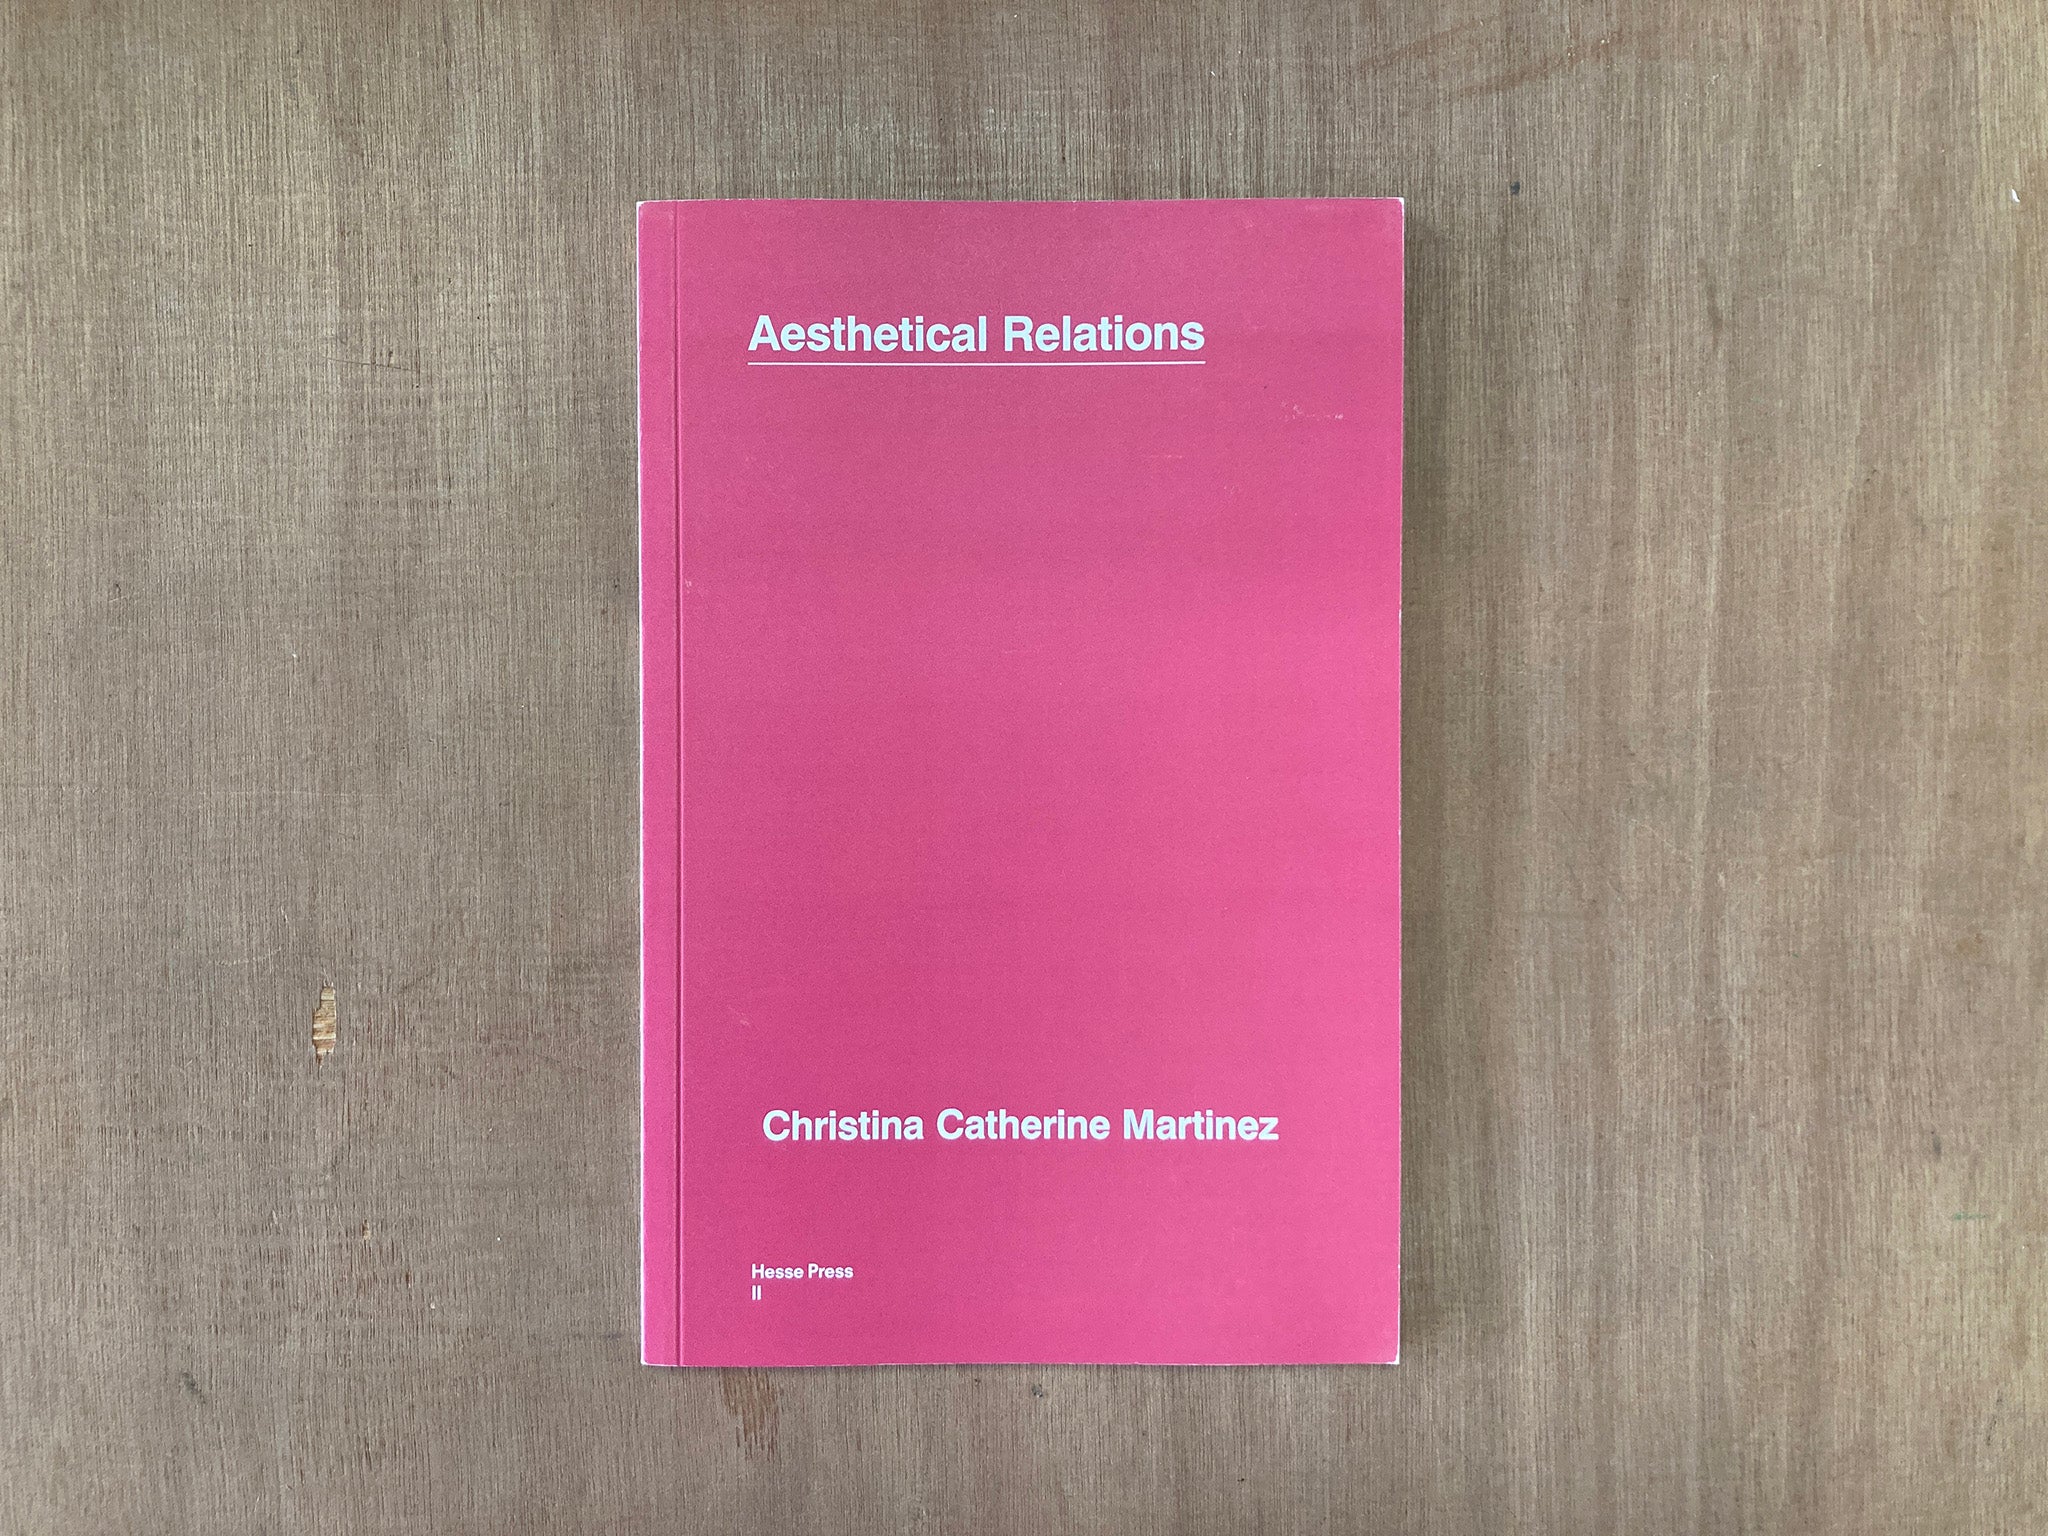 AESTHETICAL RELATIONS by Christina Catherine Martinez